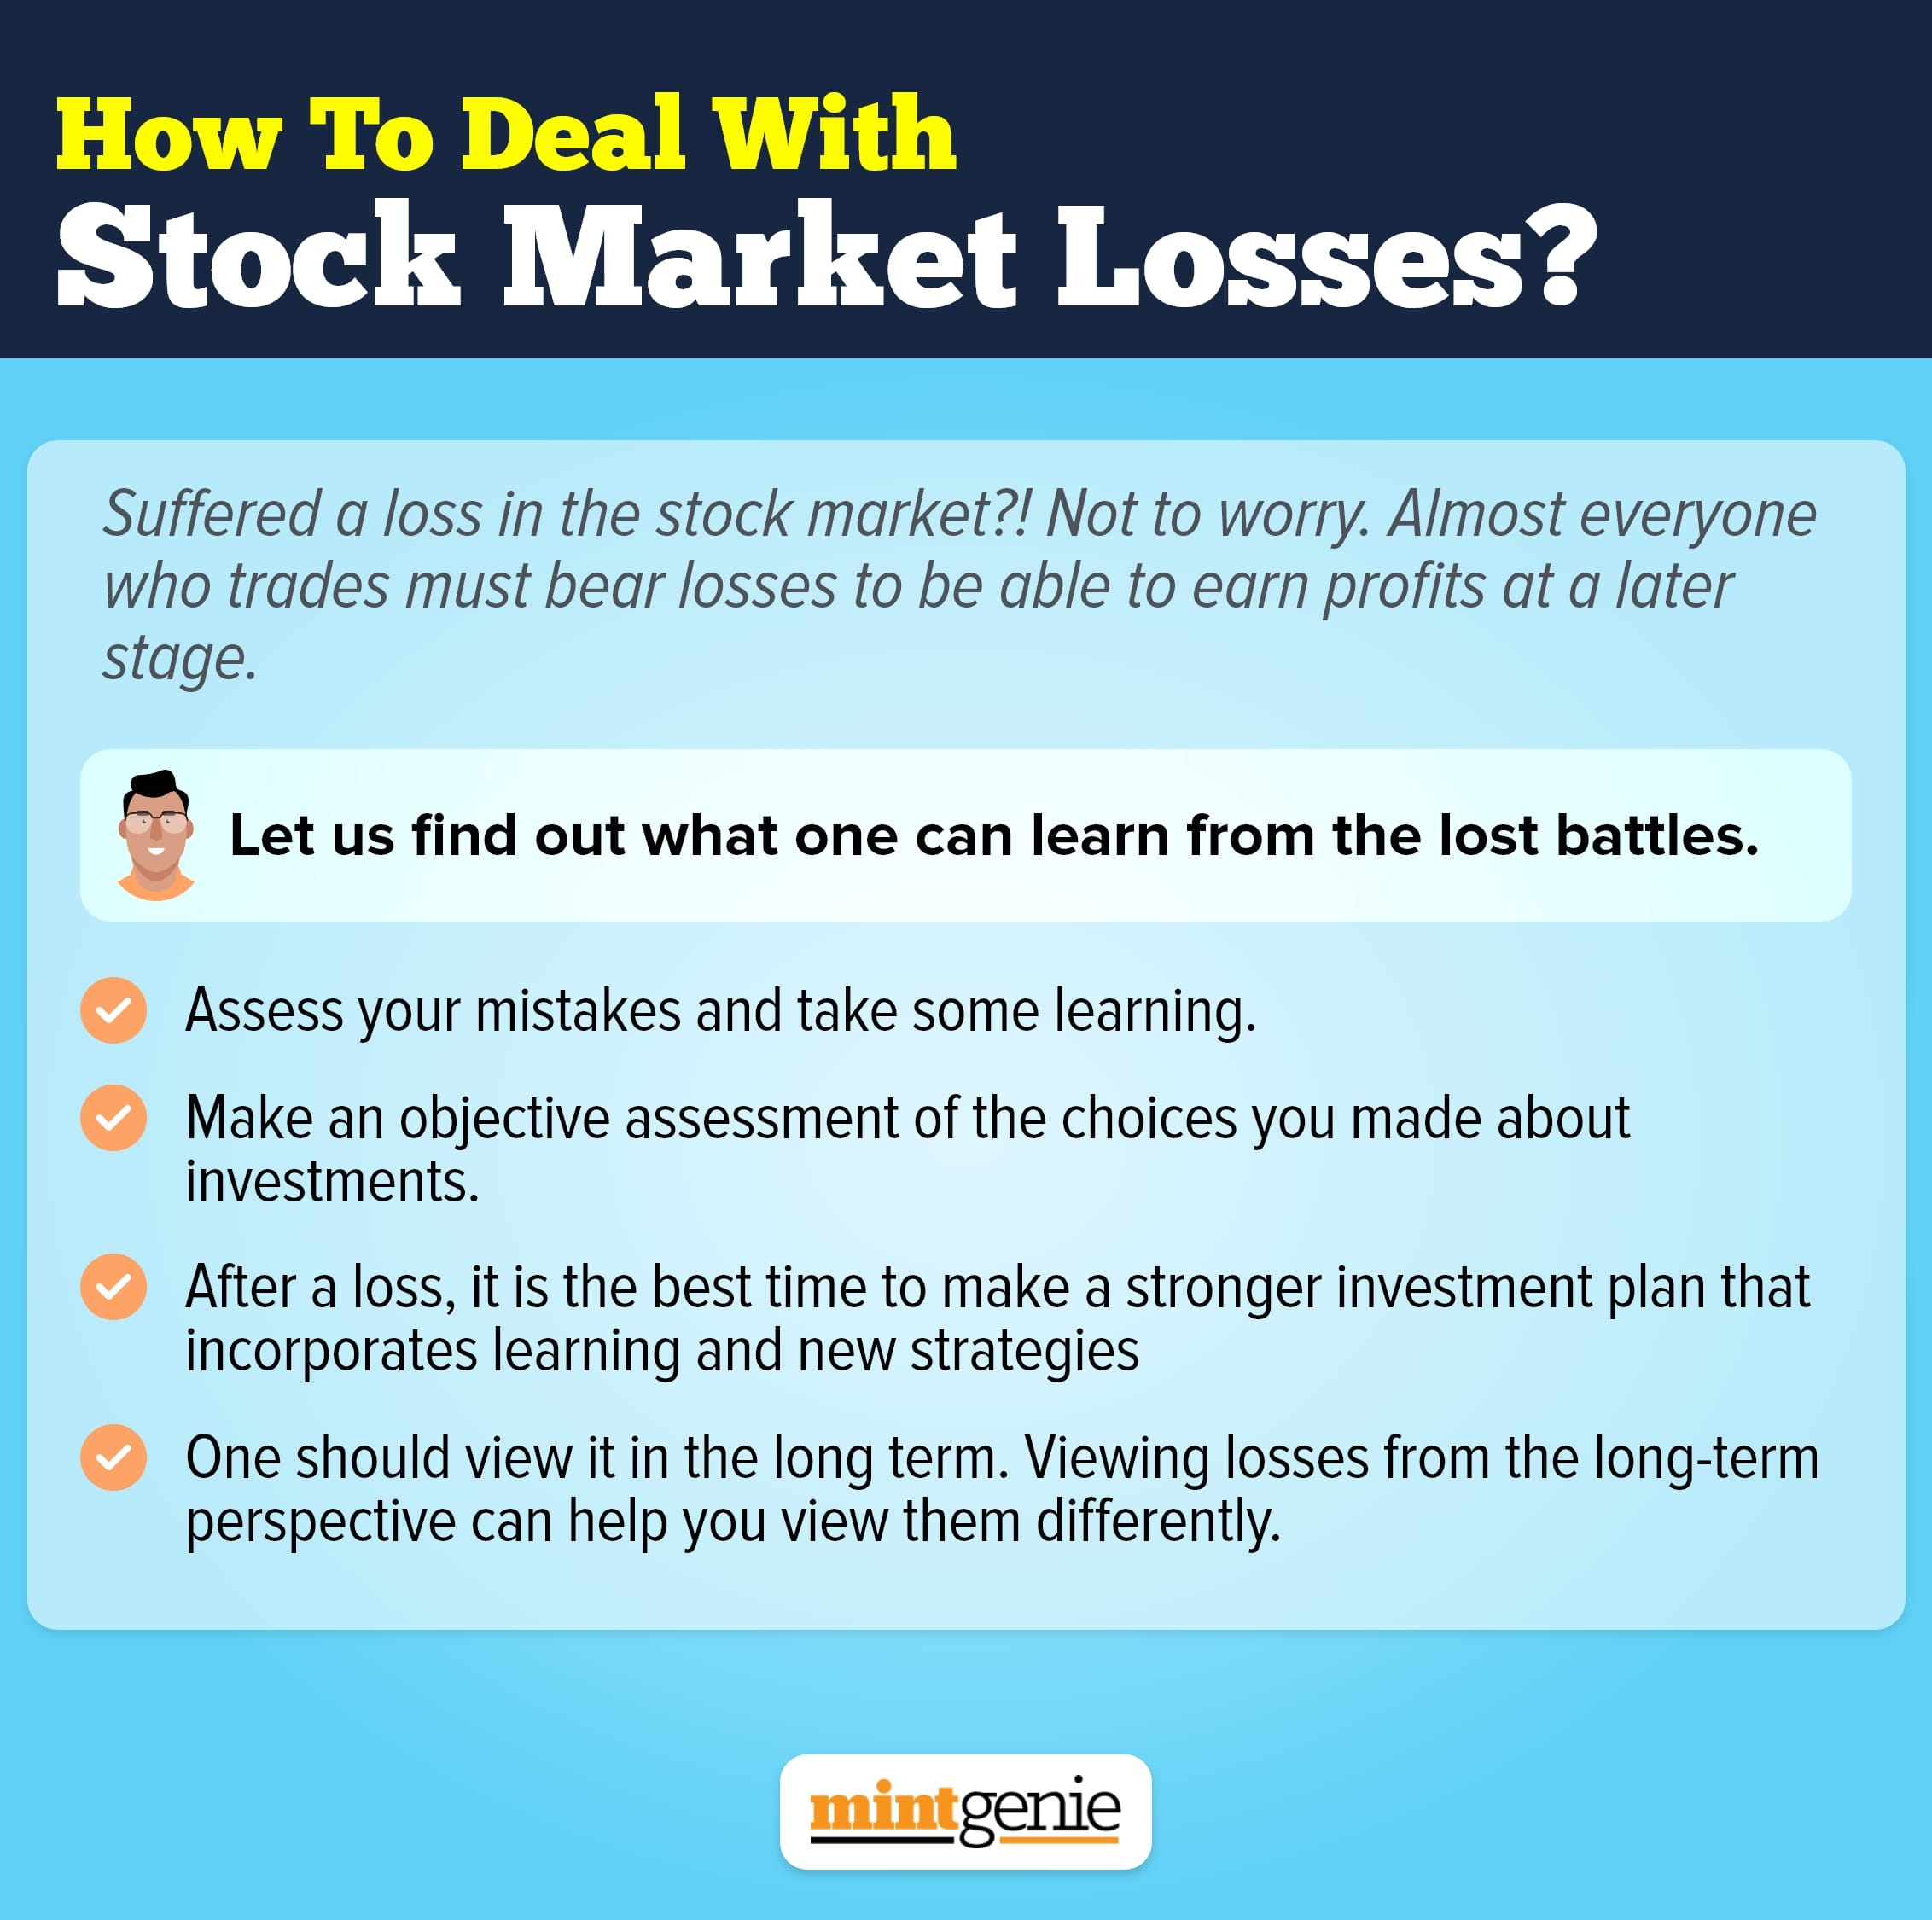 How to deal with the stock market losses?